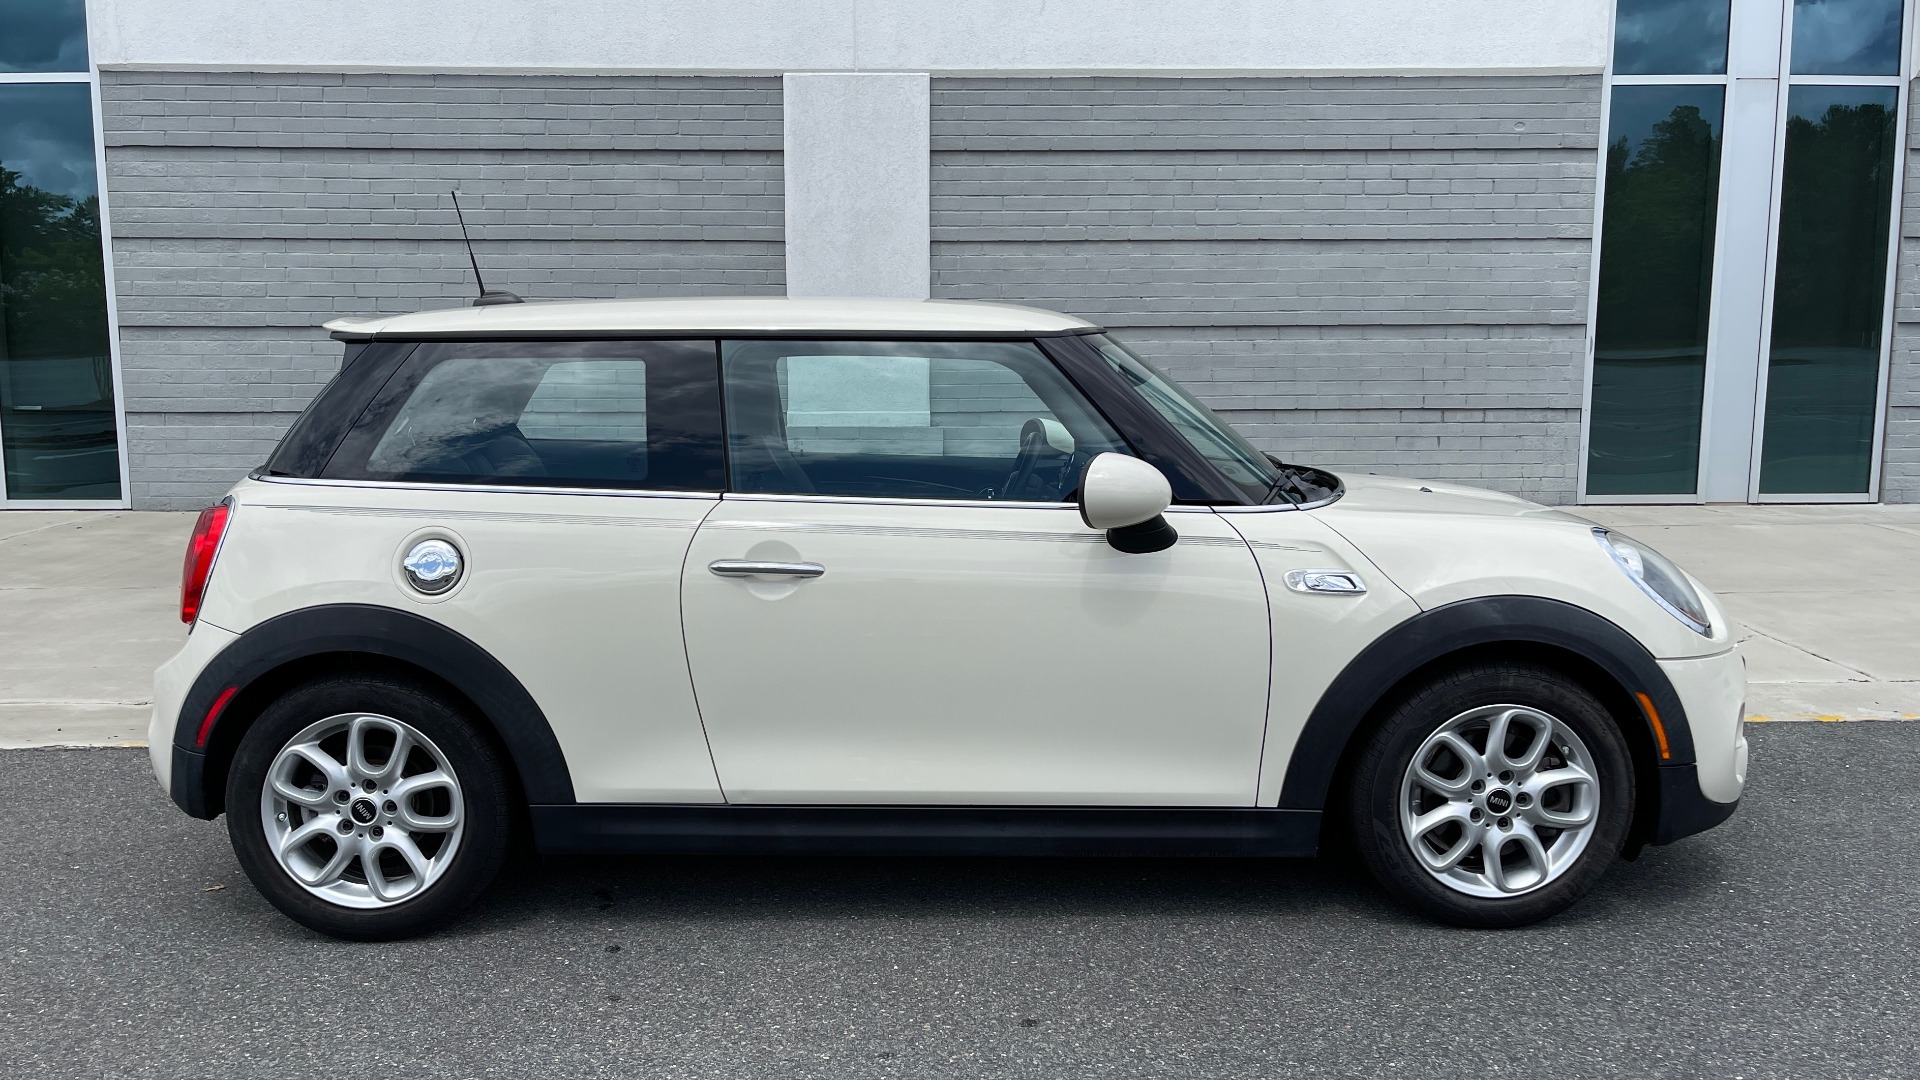 Used 2015 MINI COOPER HARDTOP S 2DR / 2.0L TURBO / FWD / 6-SPD MANUAL for sale Sold at Formula Imports in Charlotte NC 28227 7